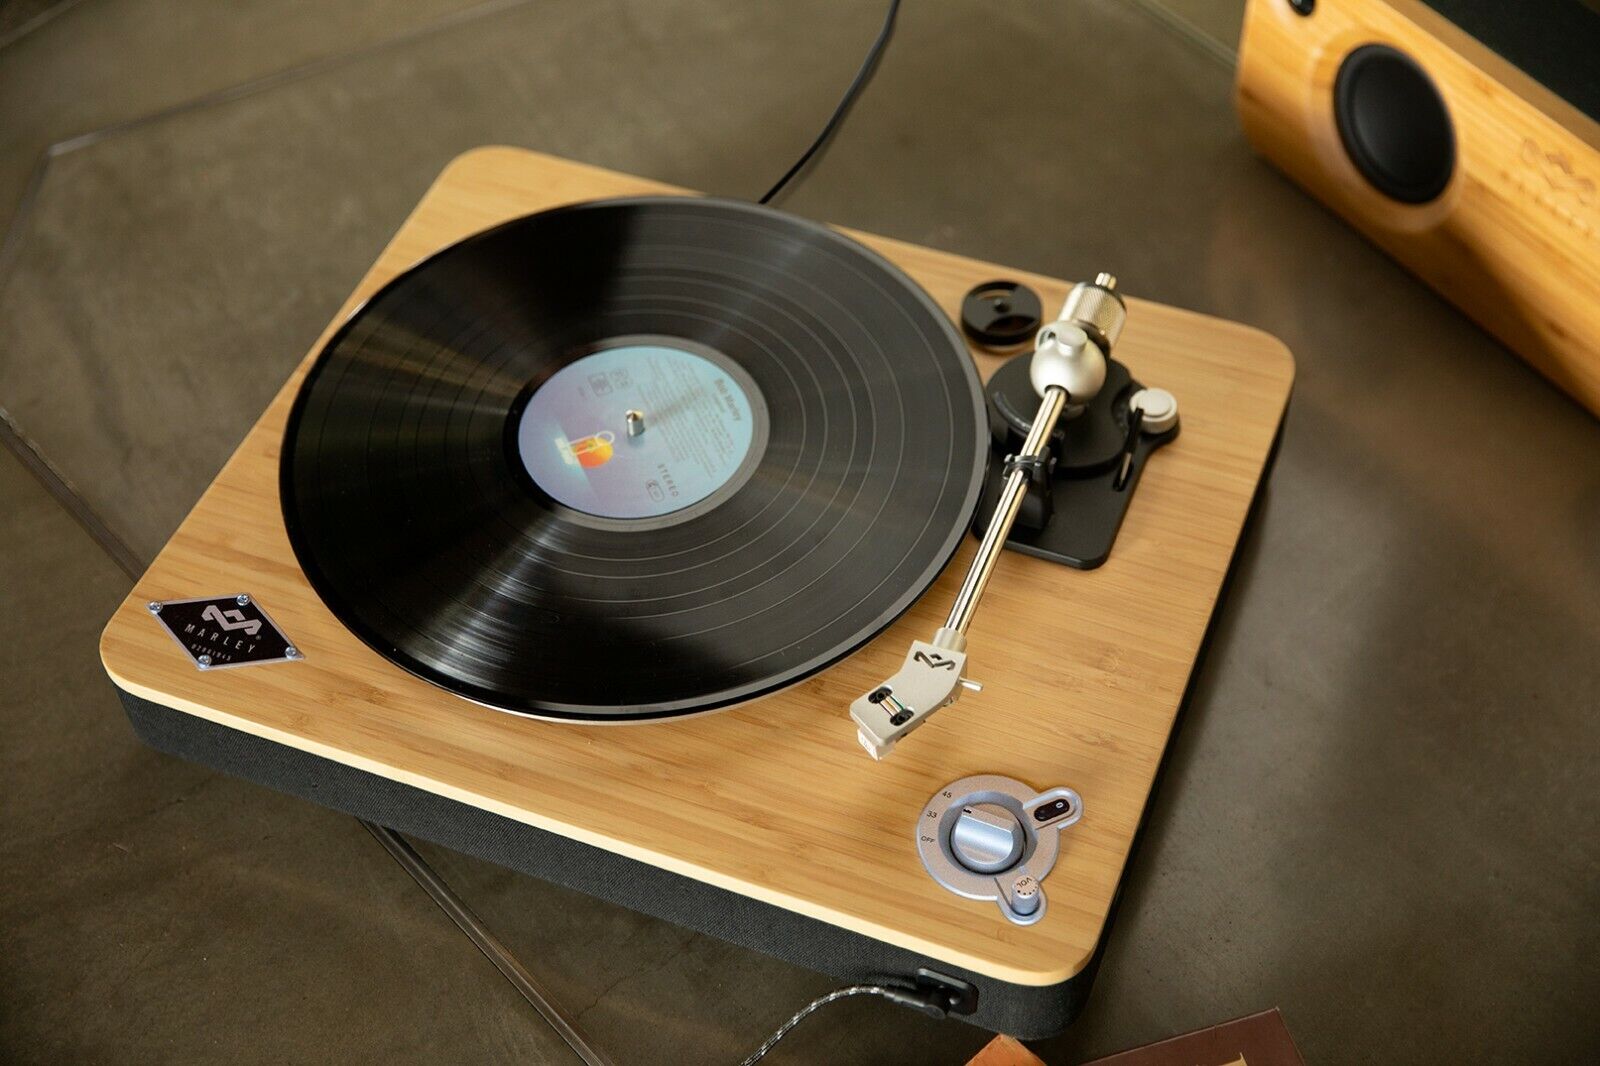 House of Marley EM STIR IT UP WIRELESS SB Bluetooth Turntable with